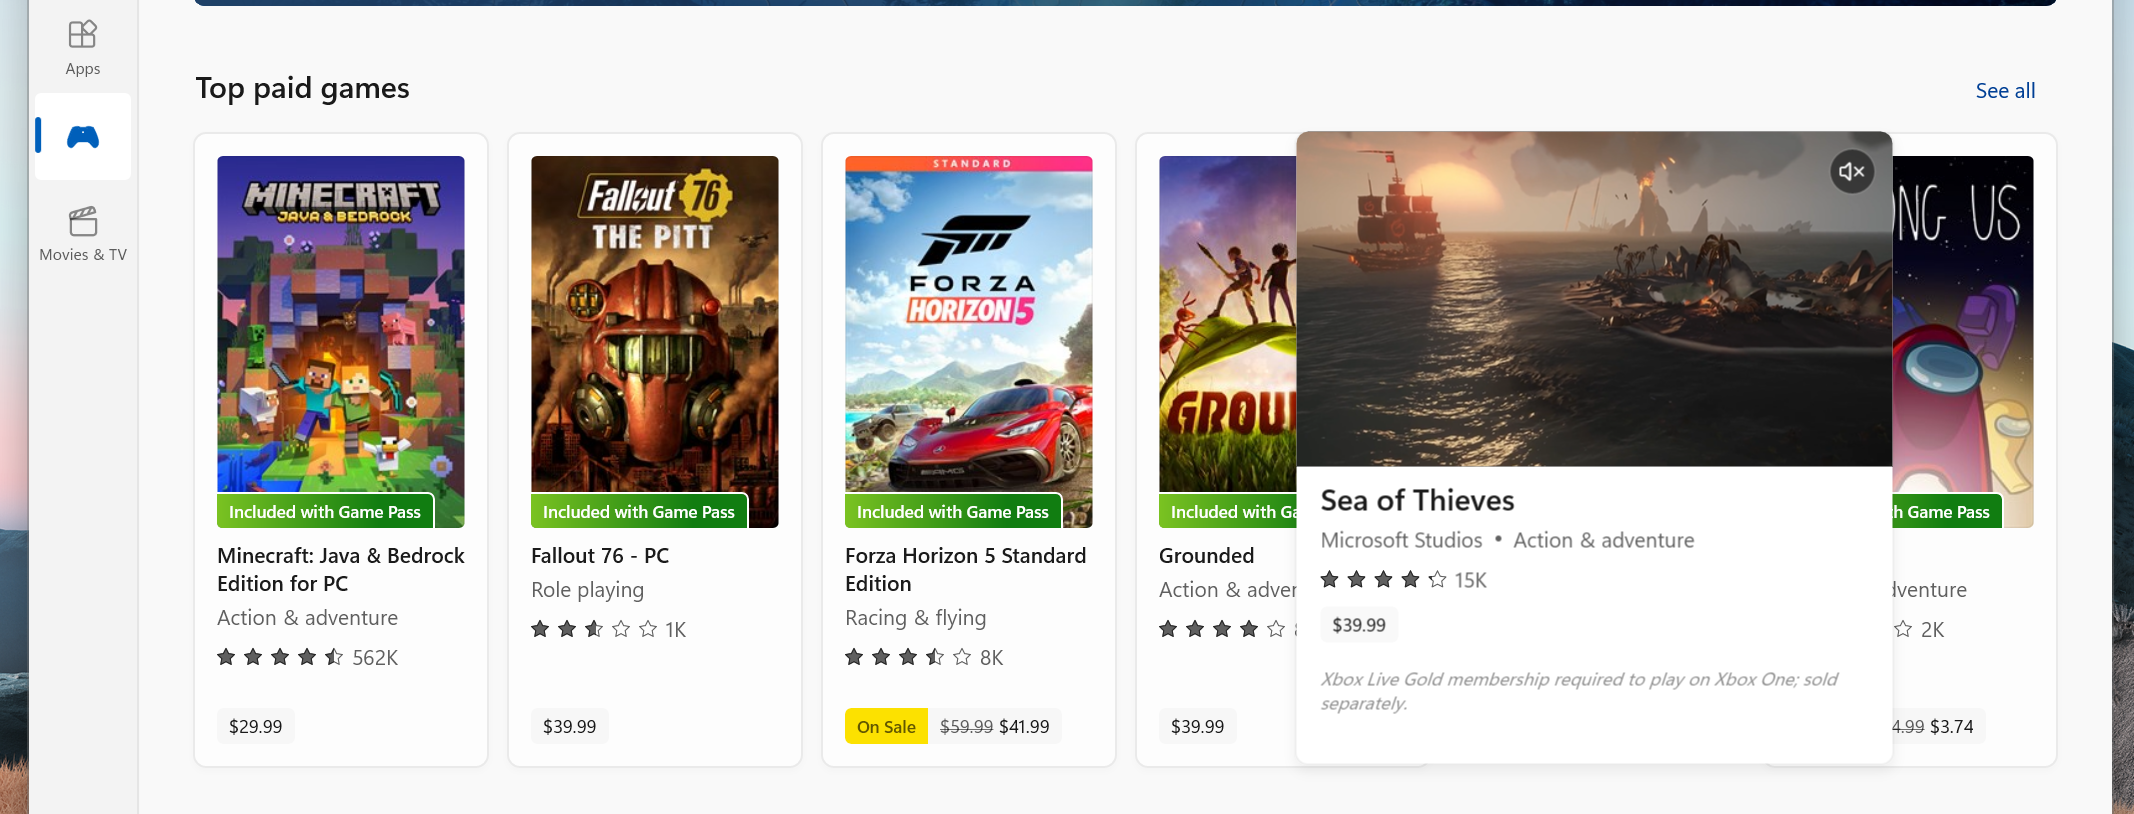 Pop-up trailers for games and movies in the Microsoft Store.